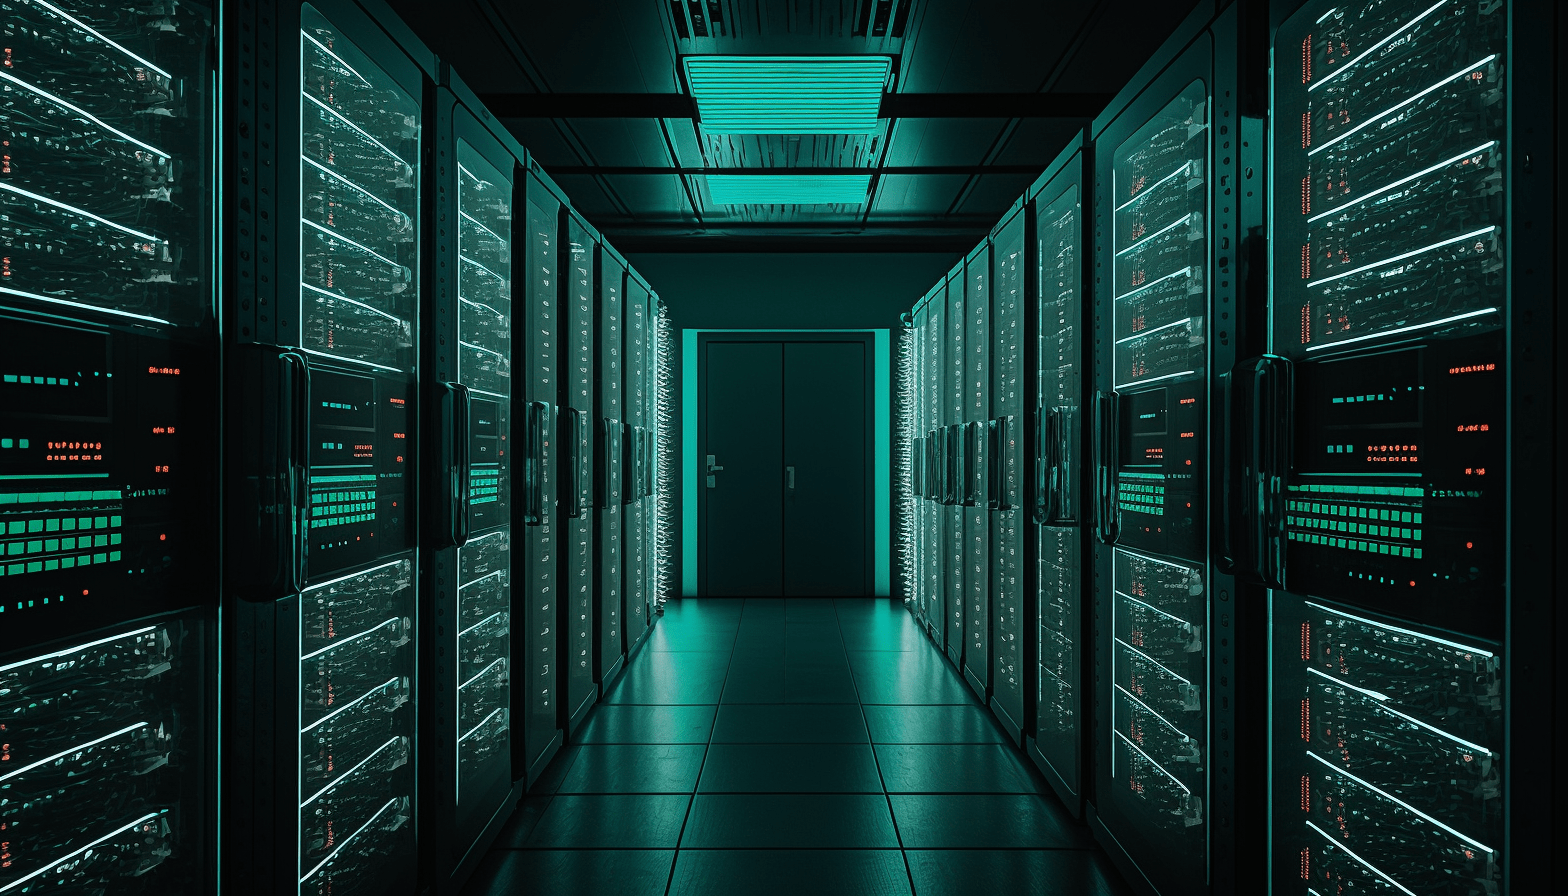 An image of a server room with rows of servers running Windows Server 2022. The servers should be neatly arranged and well-lit, suggesting a well-maintained and efficient IT infrastructure.